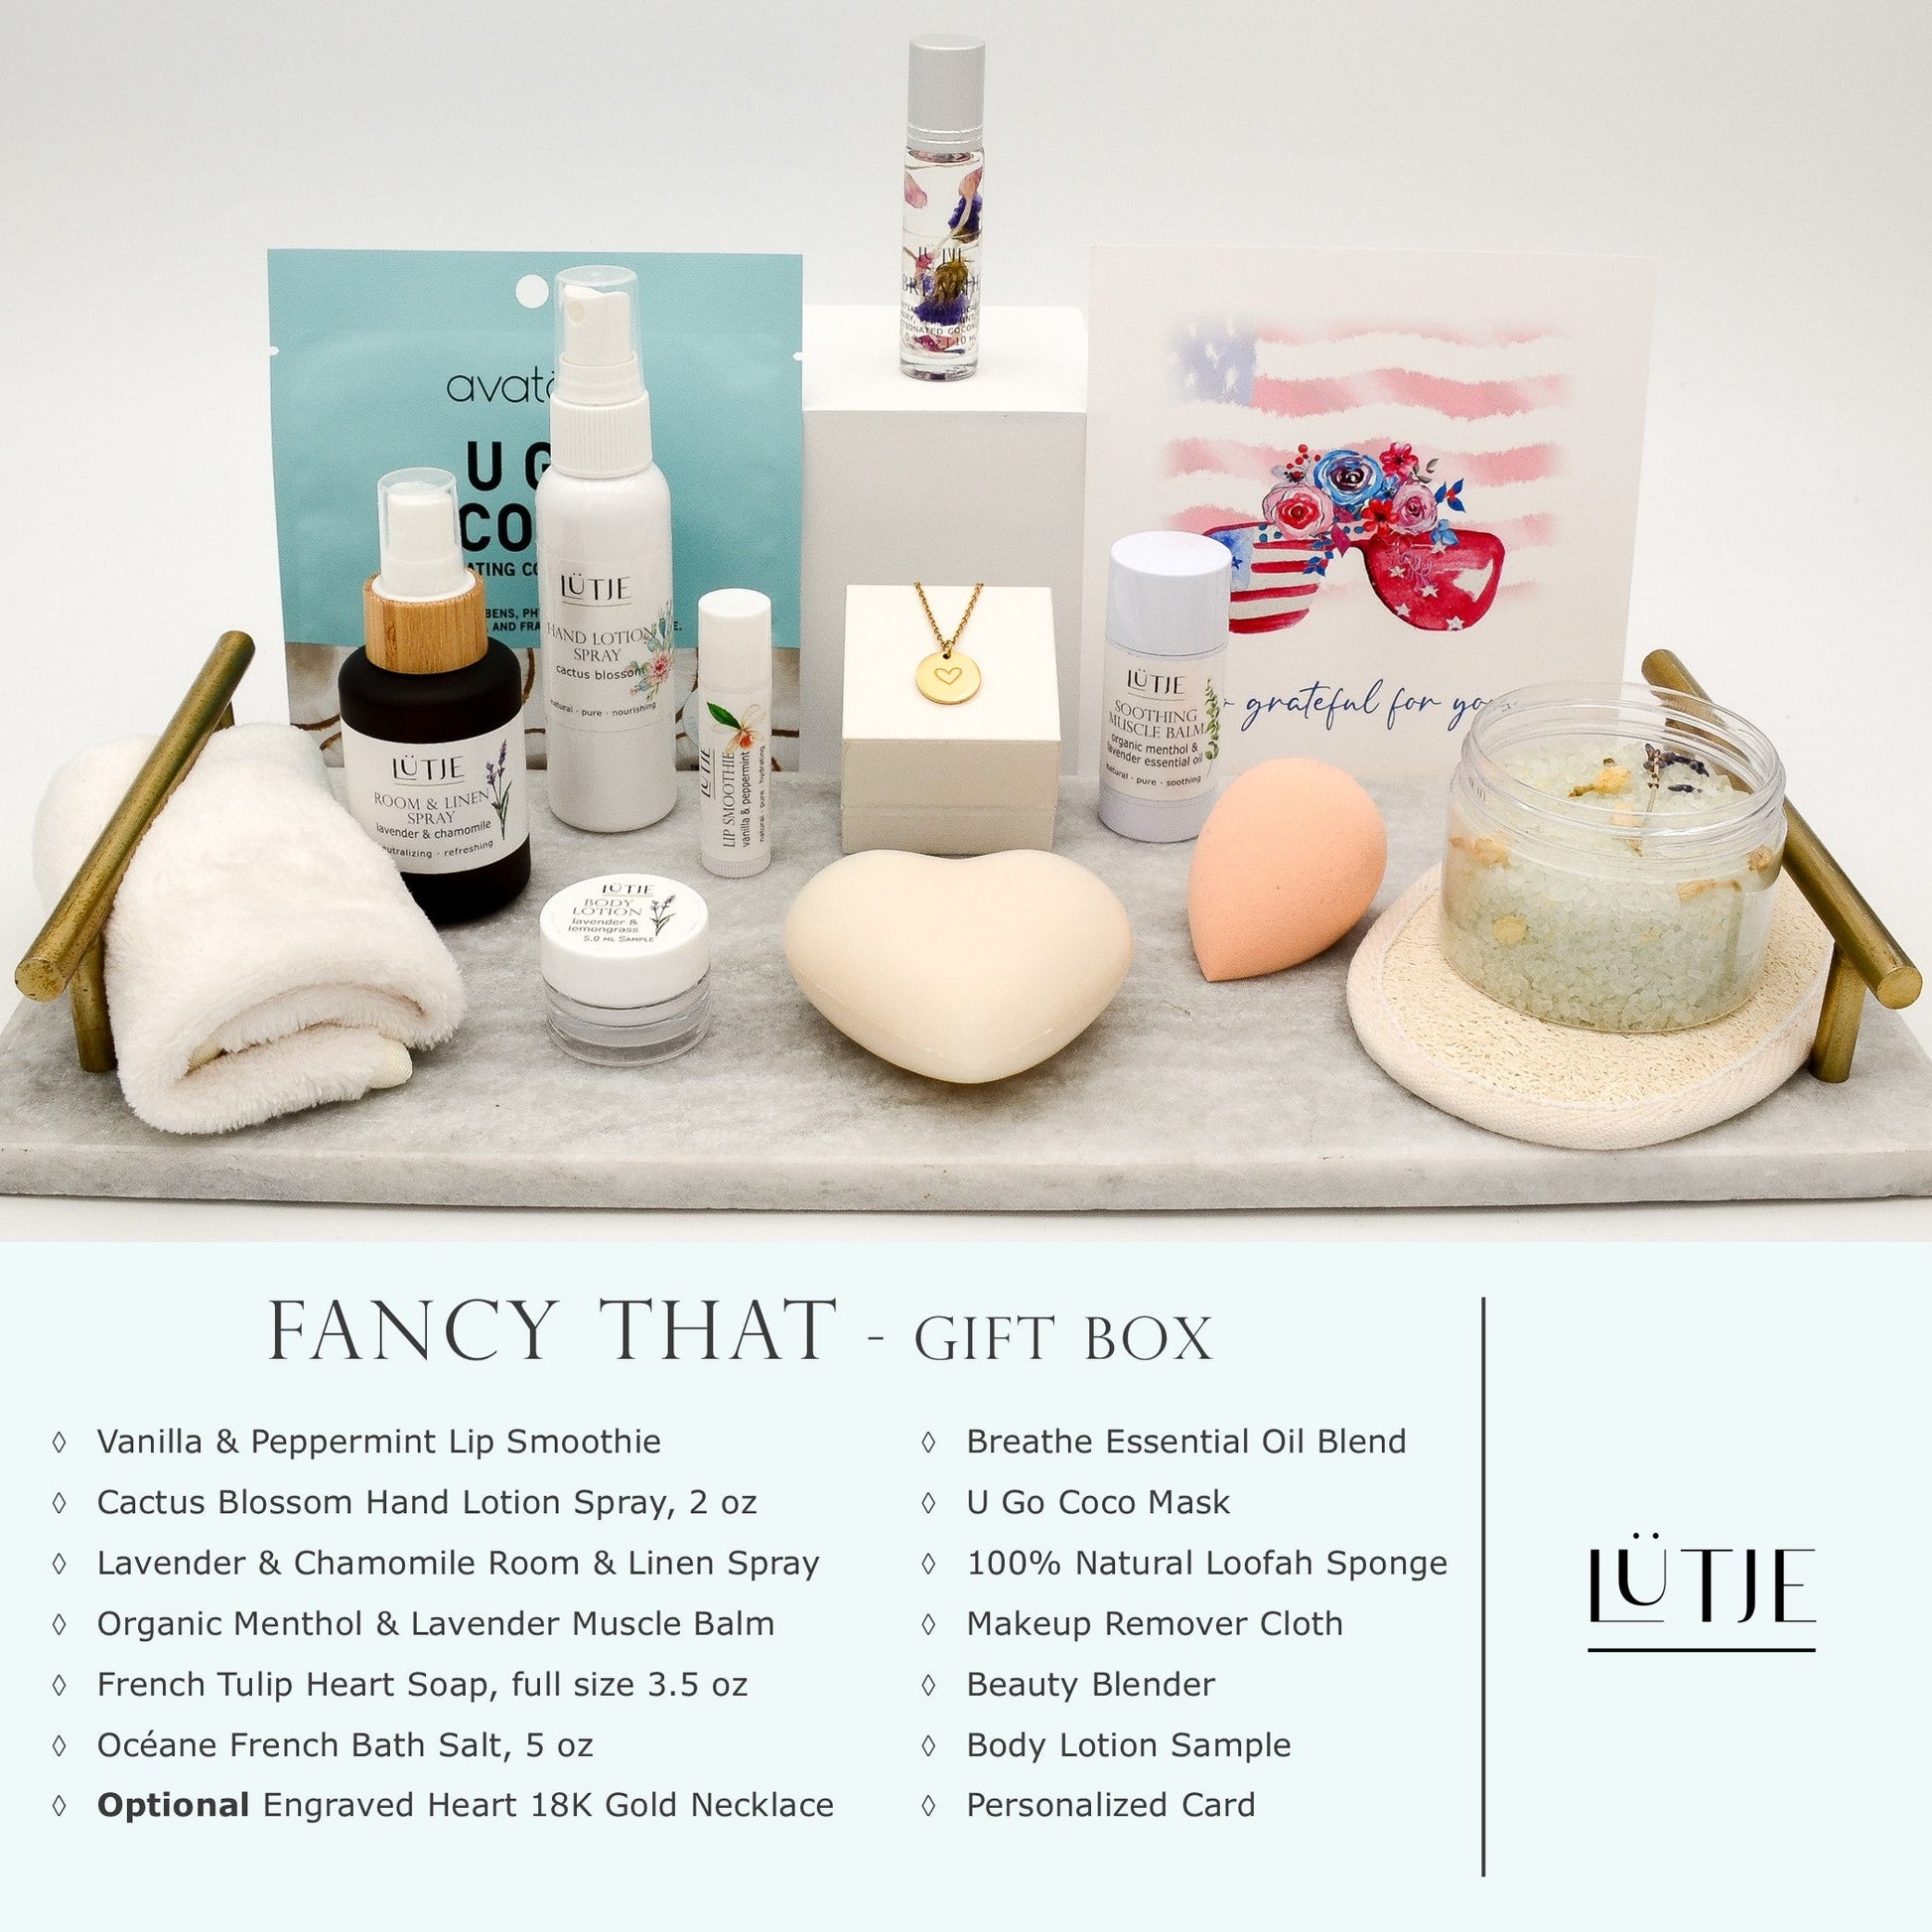 Fancy That Gift Box for women, BFF, wife, daughter, sister, mom, or grandma, includes Cactus Blossom hand lotion spray, essential oil, lip balm, soothing muscle balm, Lavender & Chamomile room & linen spray, French soap, French bath salts, hydrating face mask, other bath, spa and self-care items, and 18K gold-plated necklace with engraved heart.